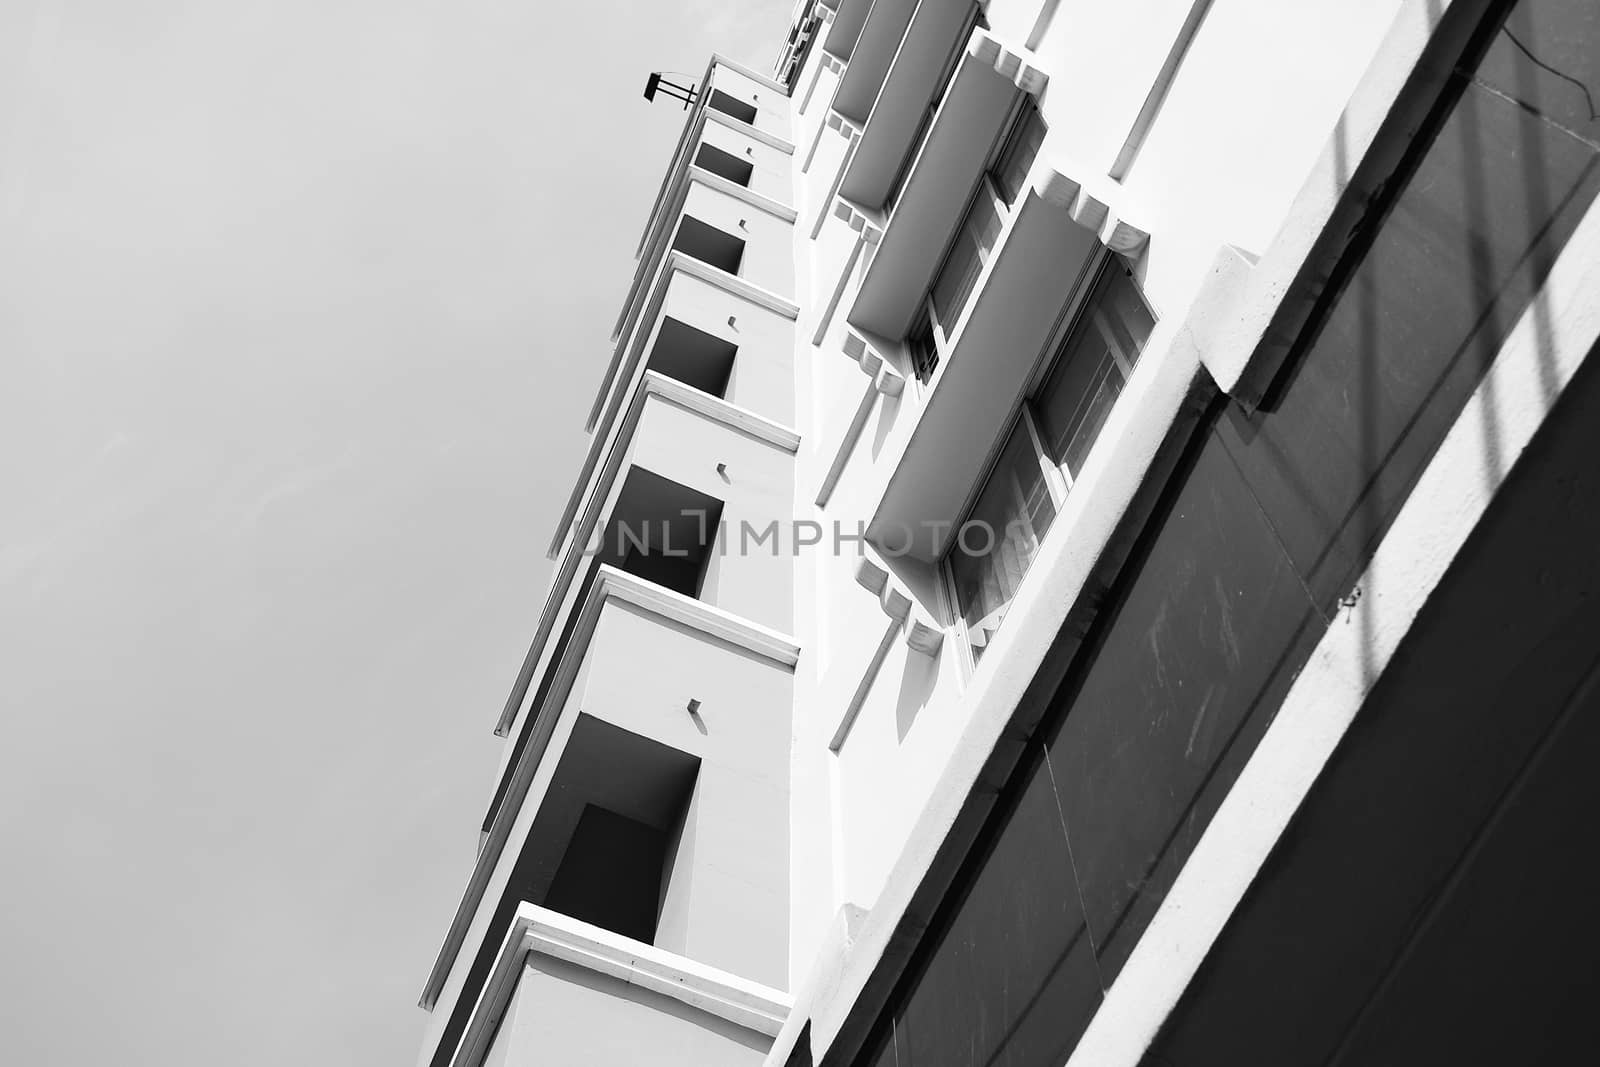 Look up at apartment housing in Thailand. the Step of building.